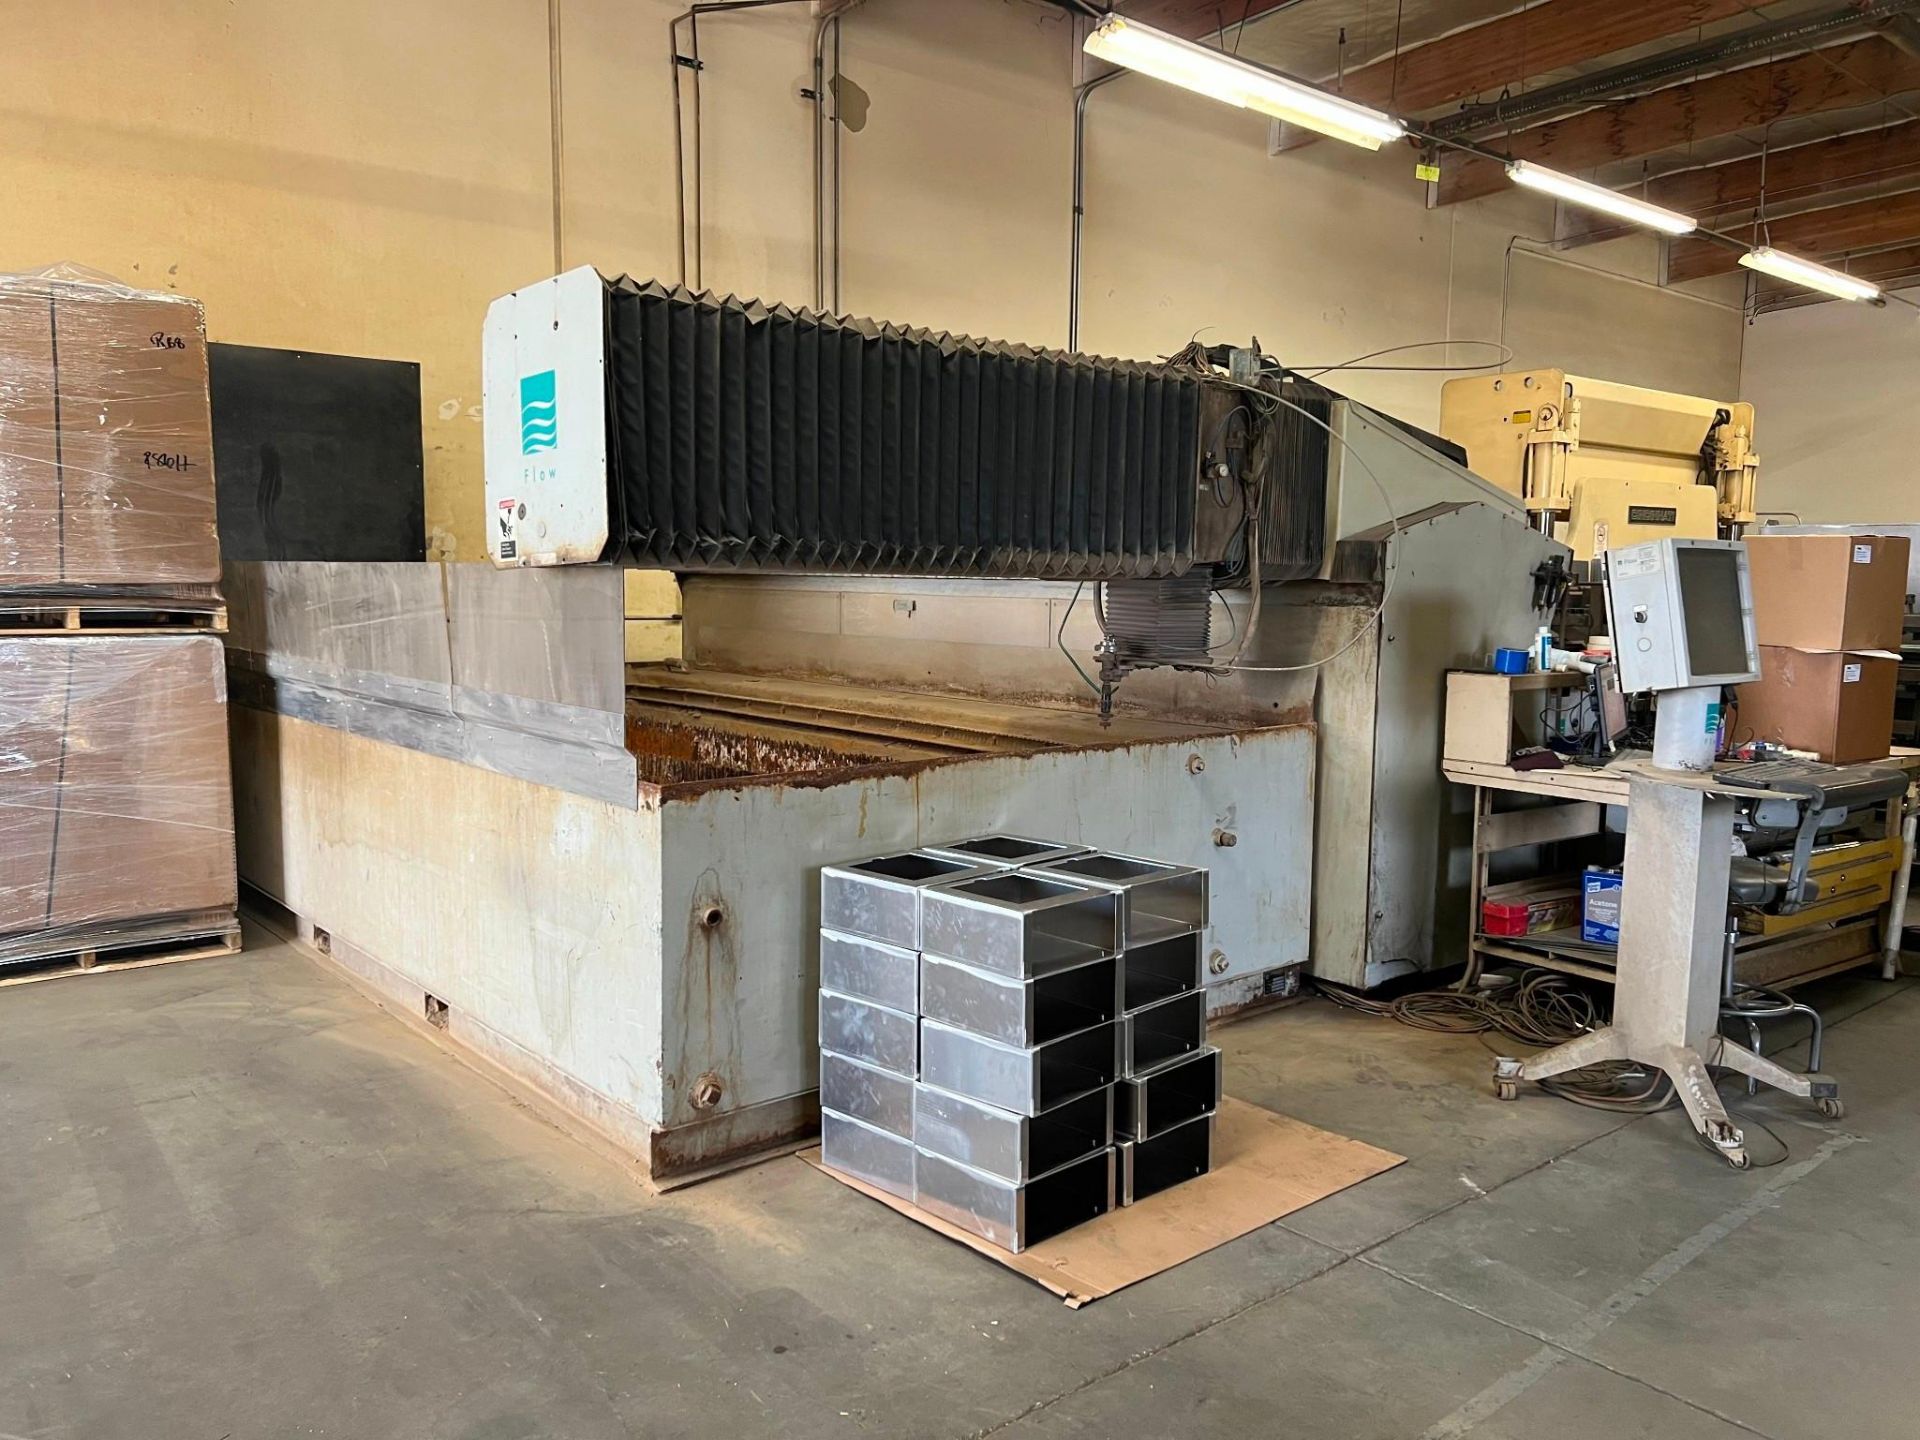 6'X12' IFB FLOW WATERJET, 2008 - EQUIPPED WITH INTENSIFIER AND NEW MOTOR